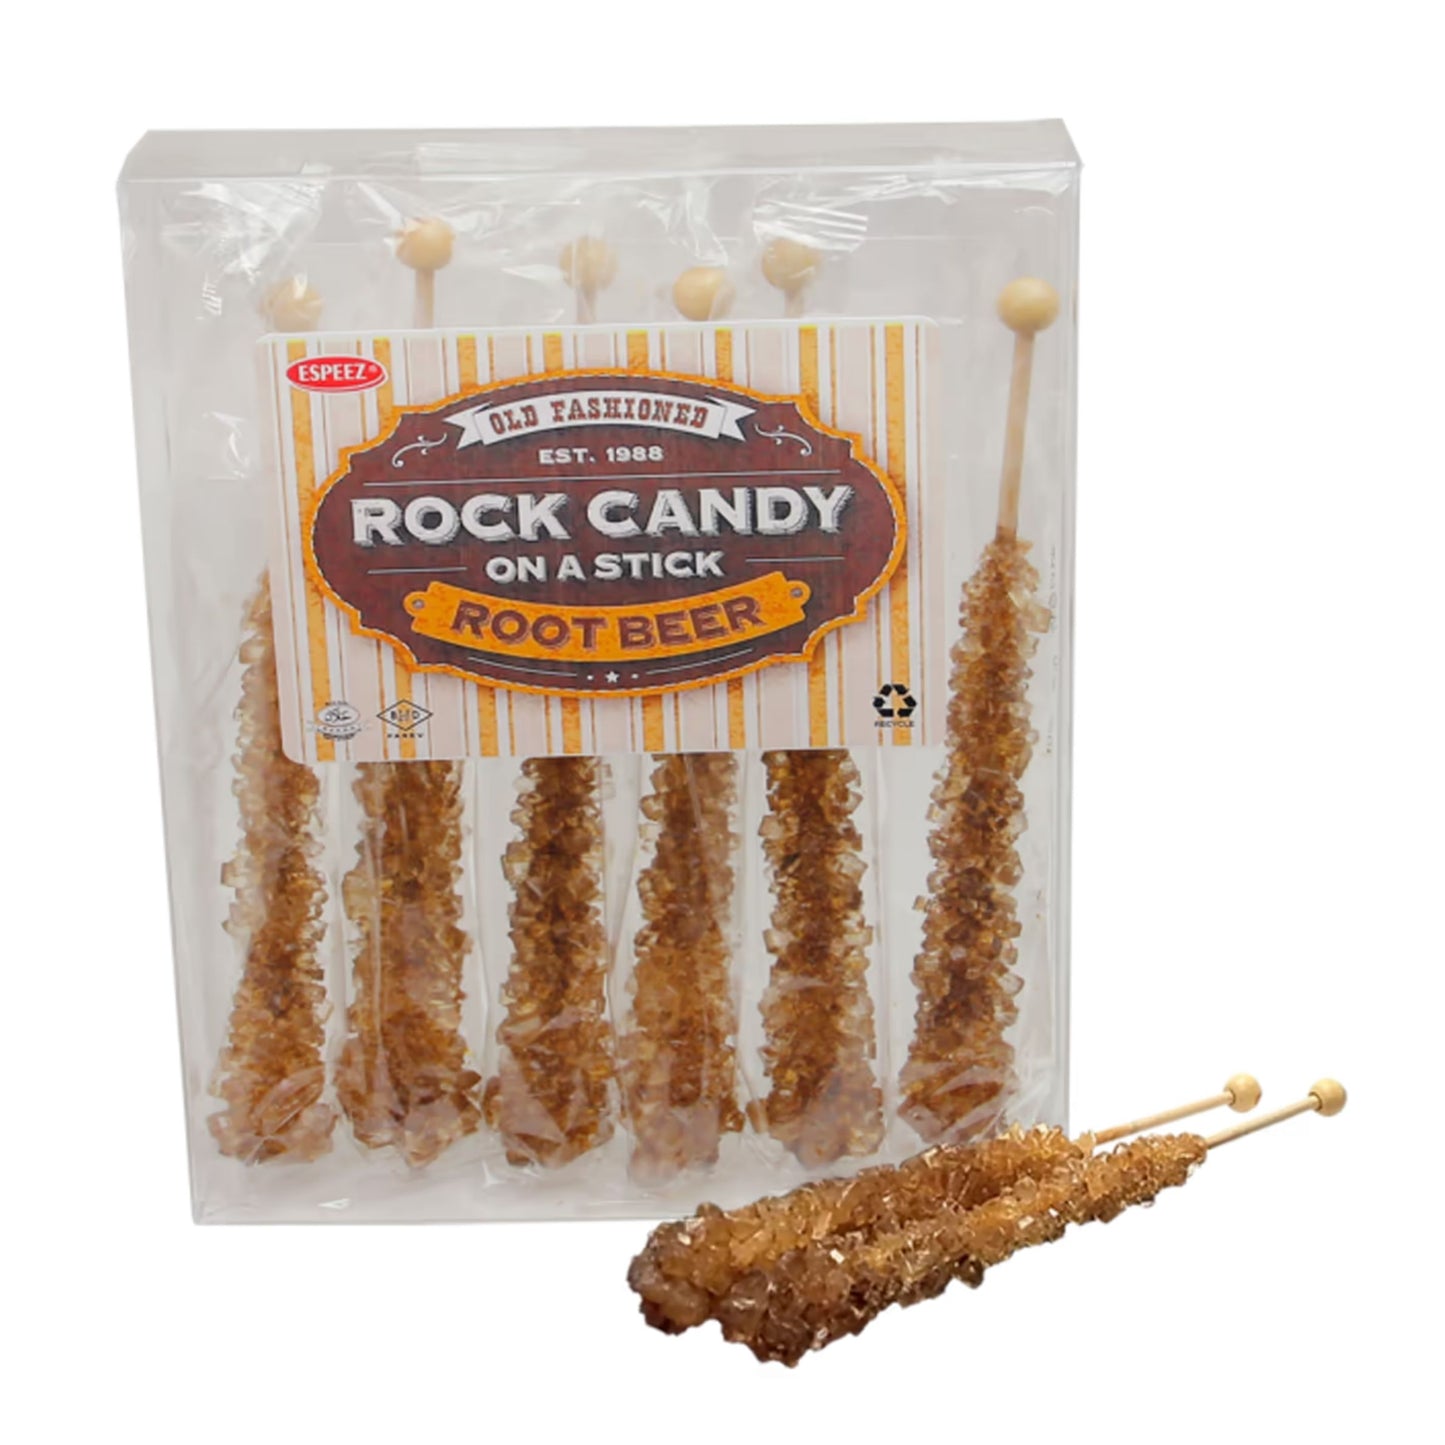 Rock Candy Acetate Boxes - 12ct